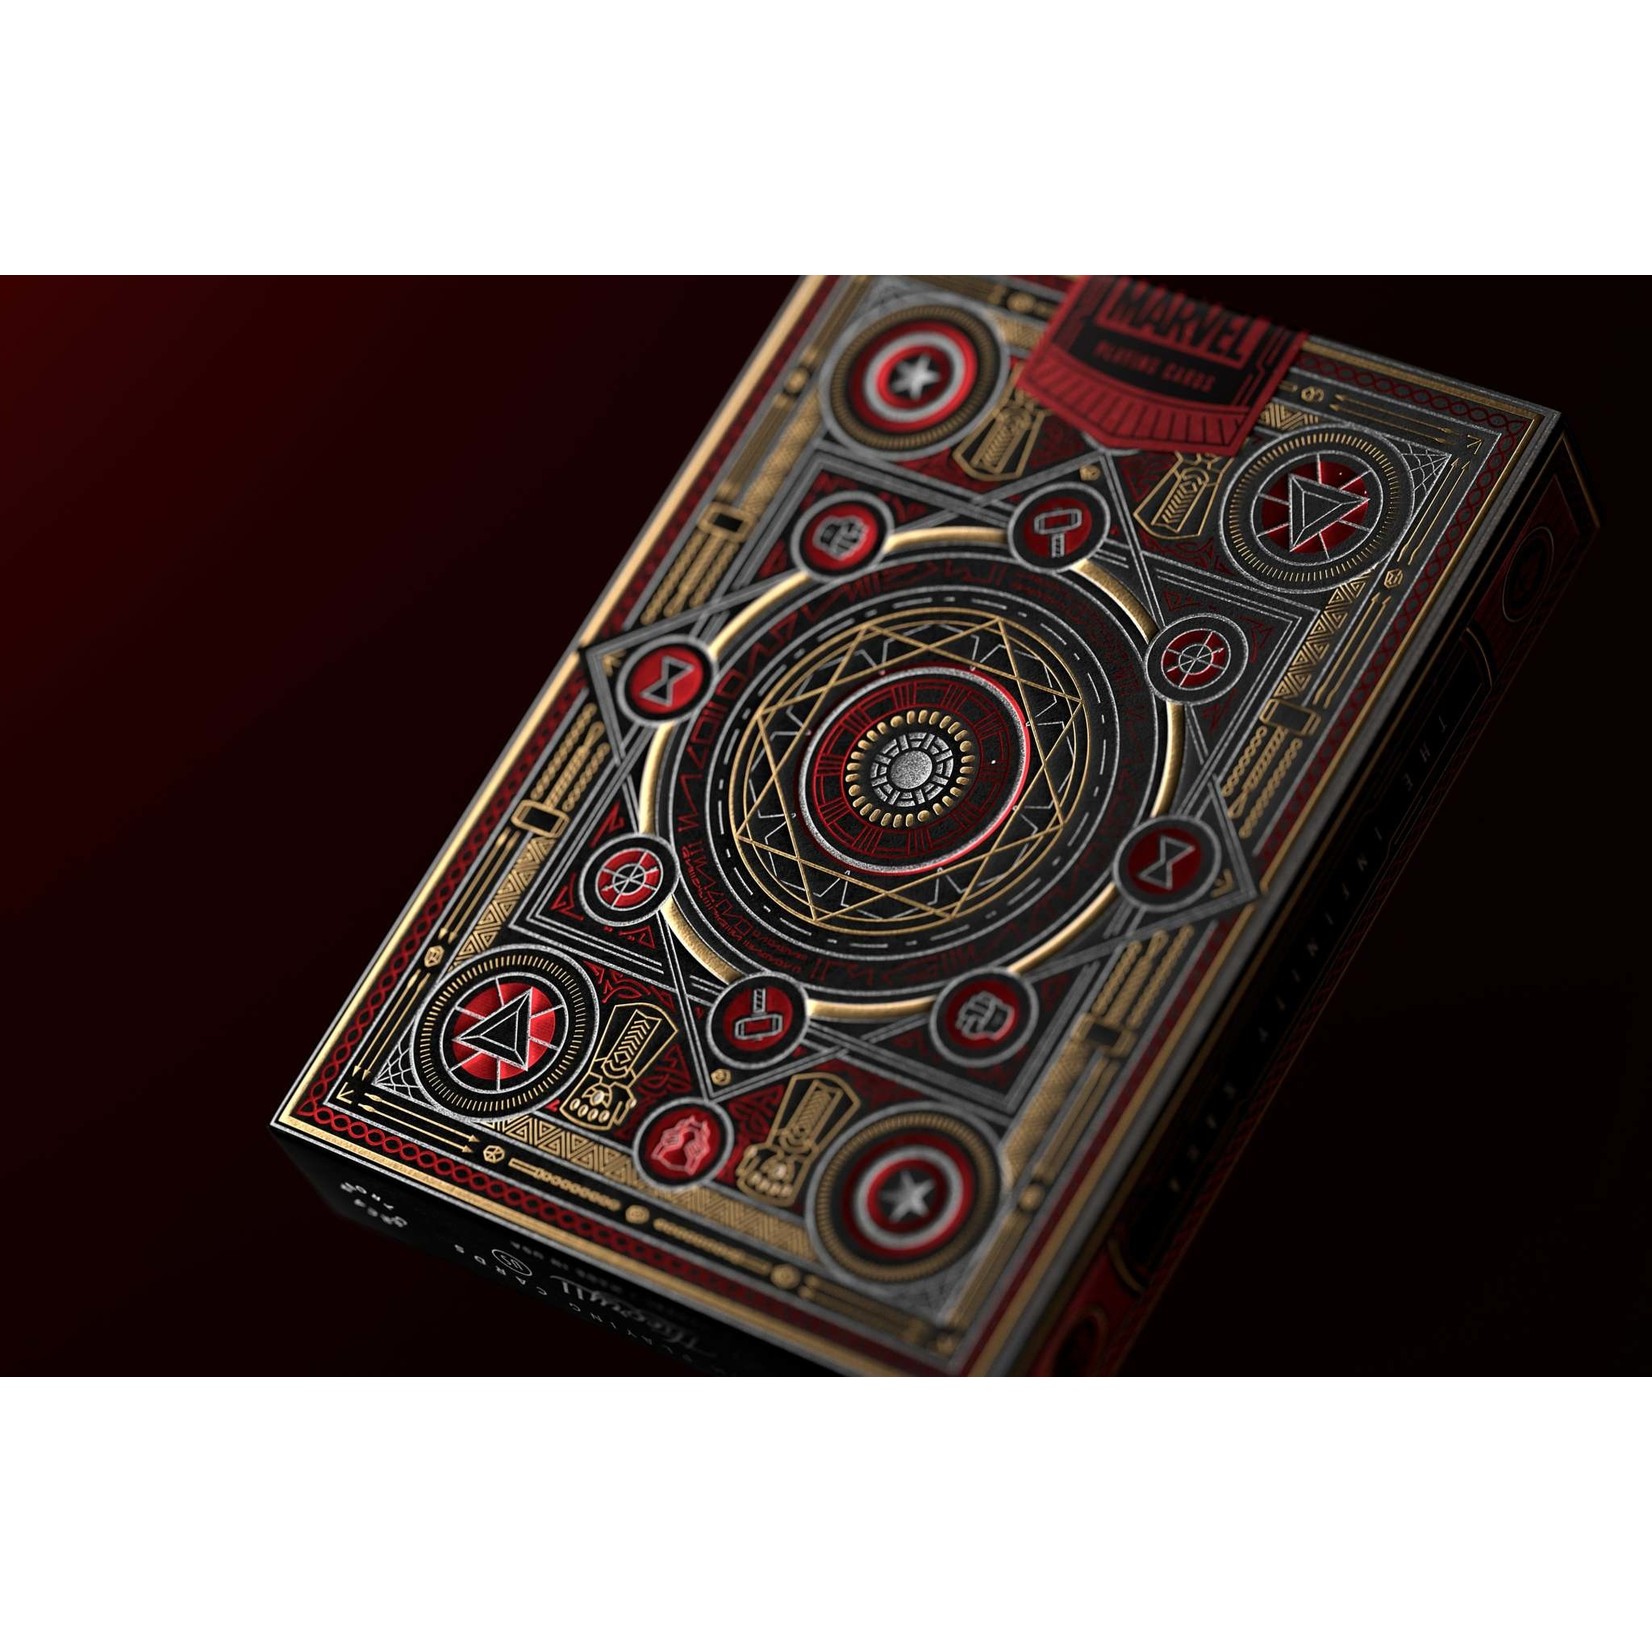 AVENGERS: Infinity Saga Playing Cards - Red Edition